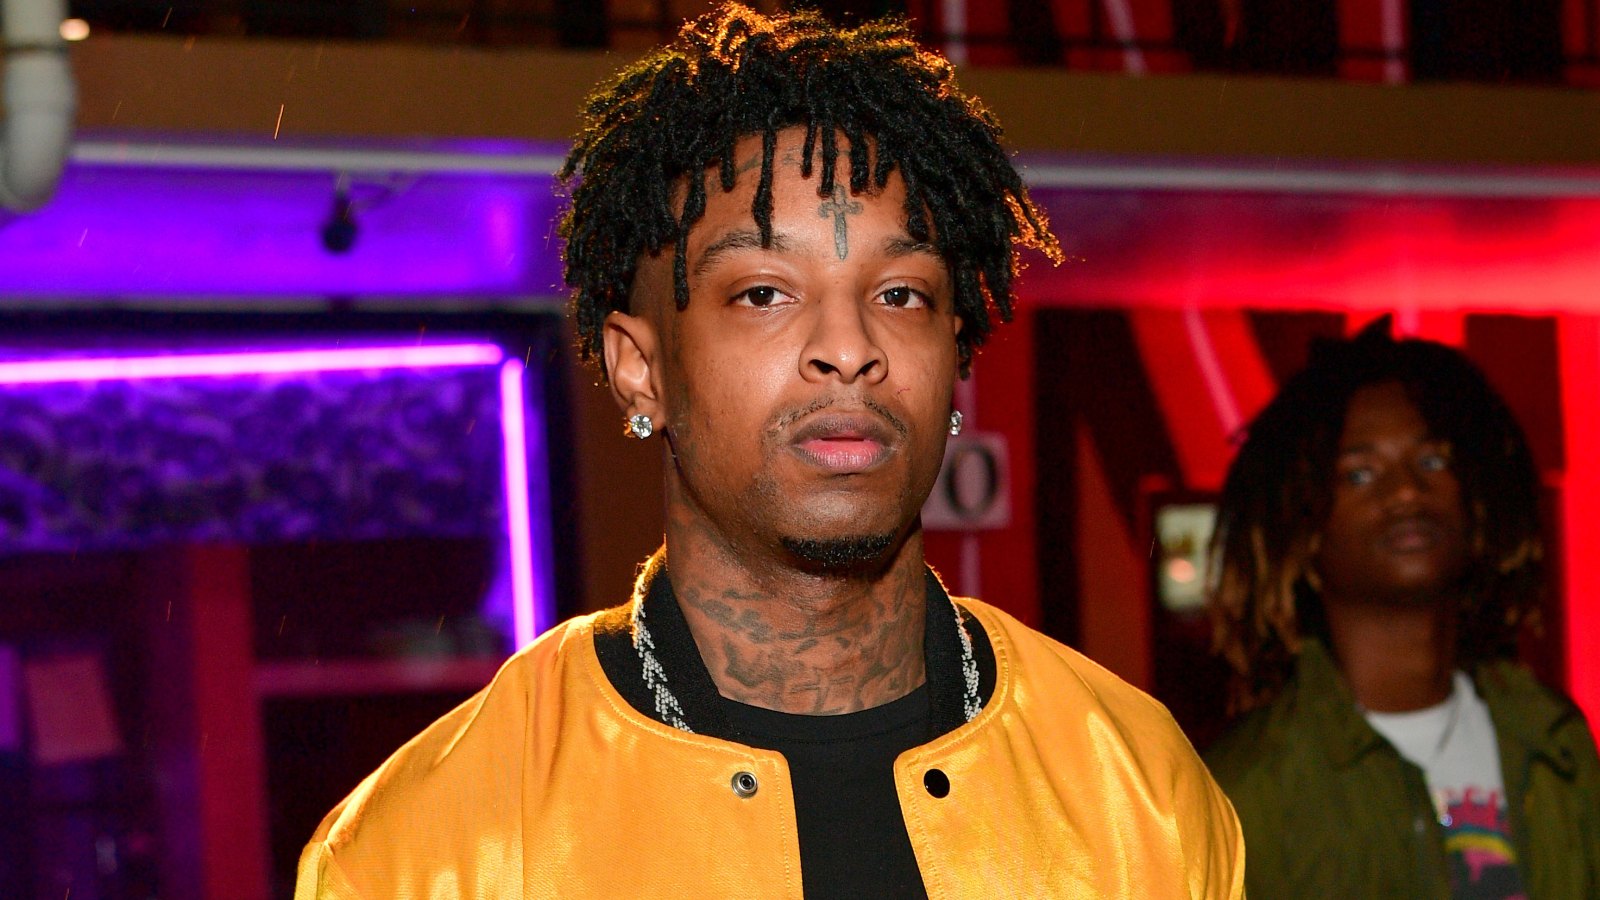 Rapper 21 Savage Arrested By Ice, Facing Deportation Report